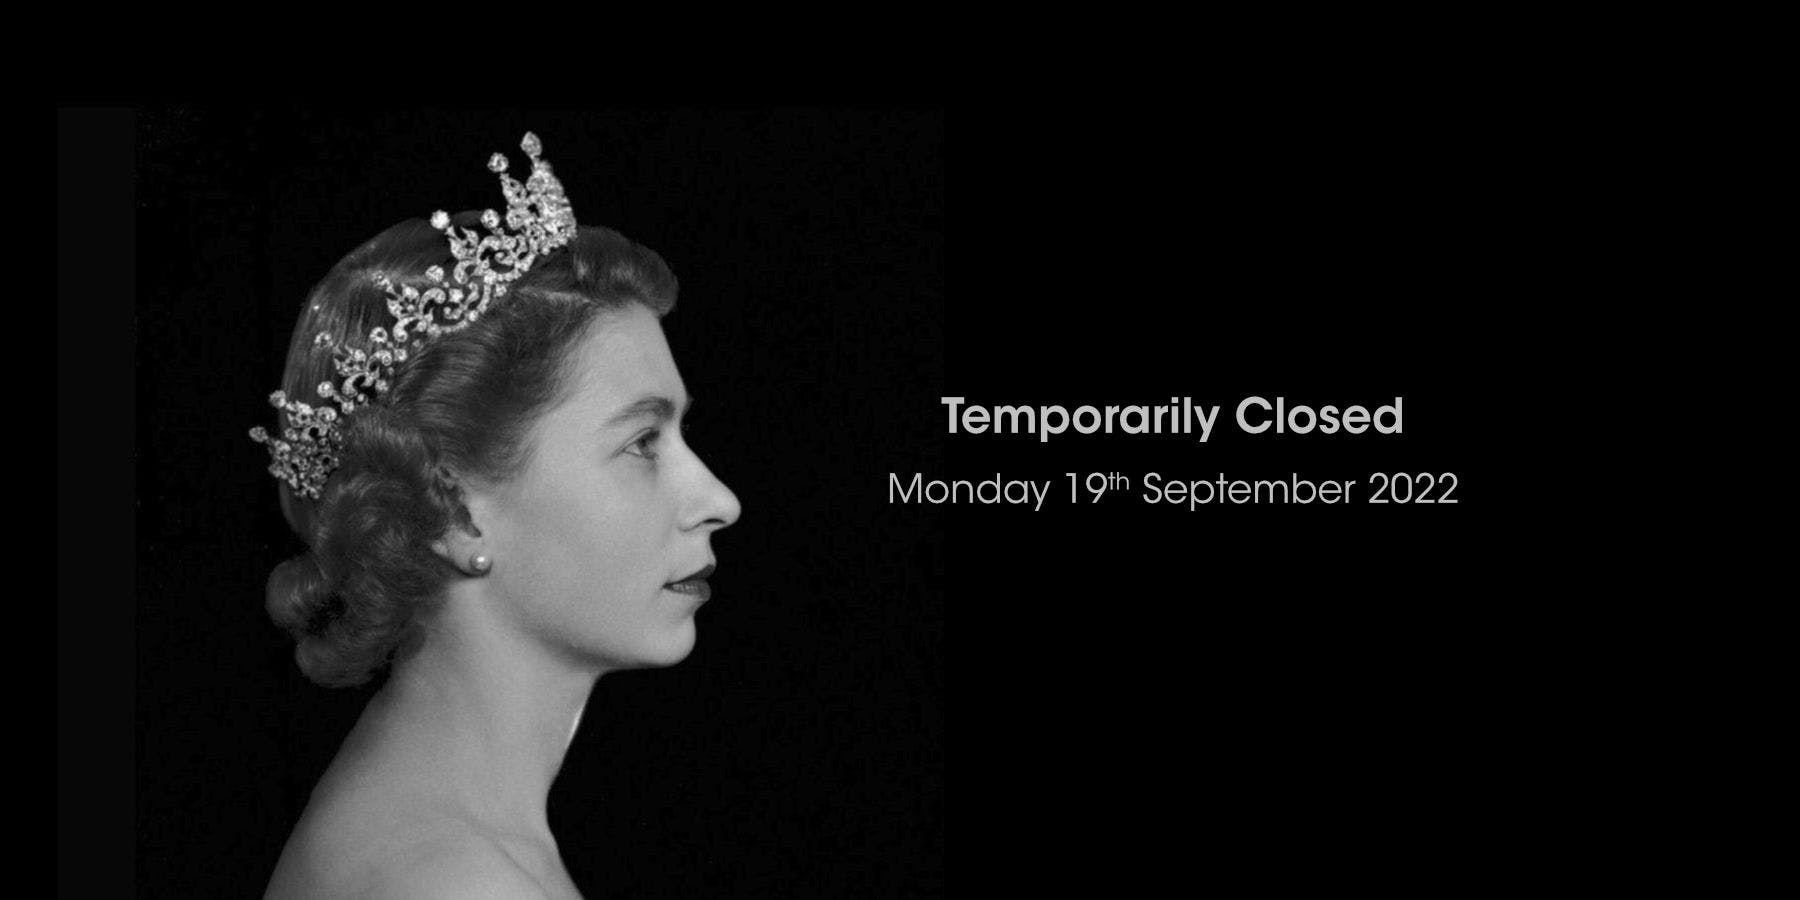 In honour of HM Queen Elizabeth II, Fine Sounds UK will be temporarily closed on Monday 19th September 2022